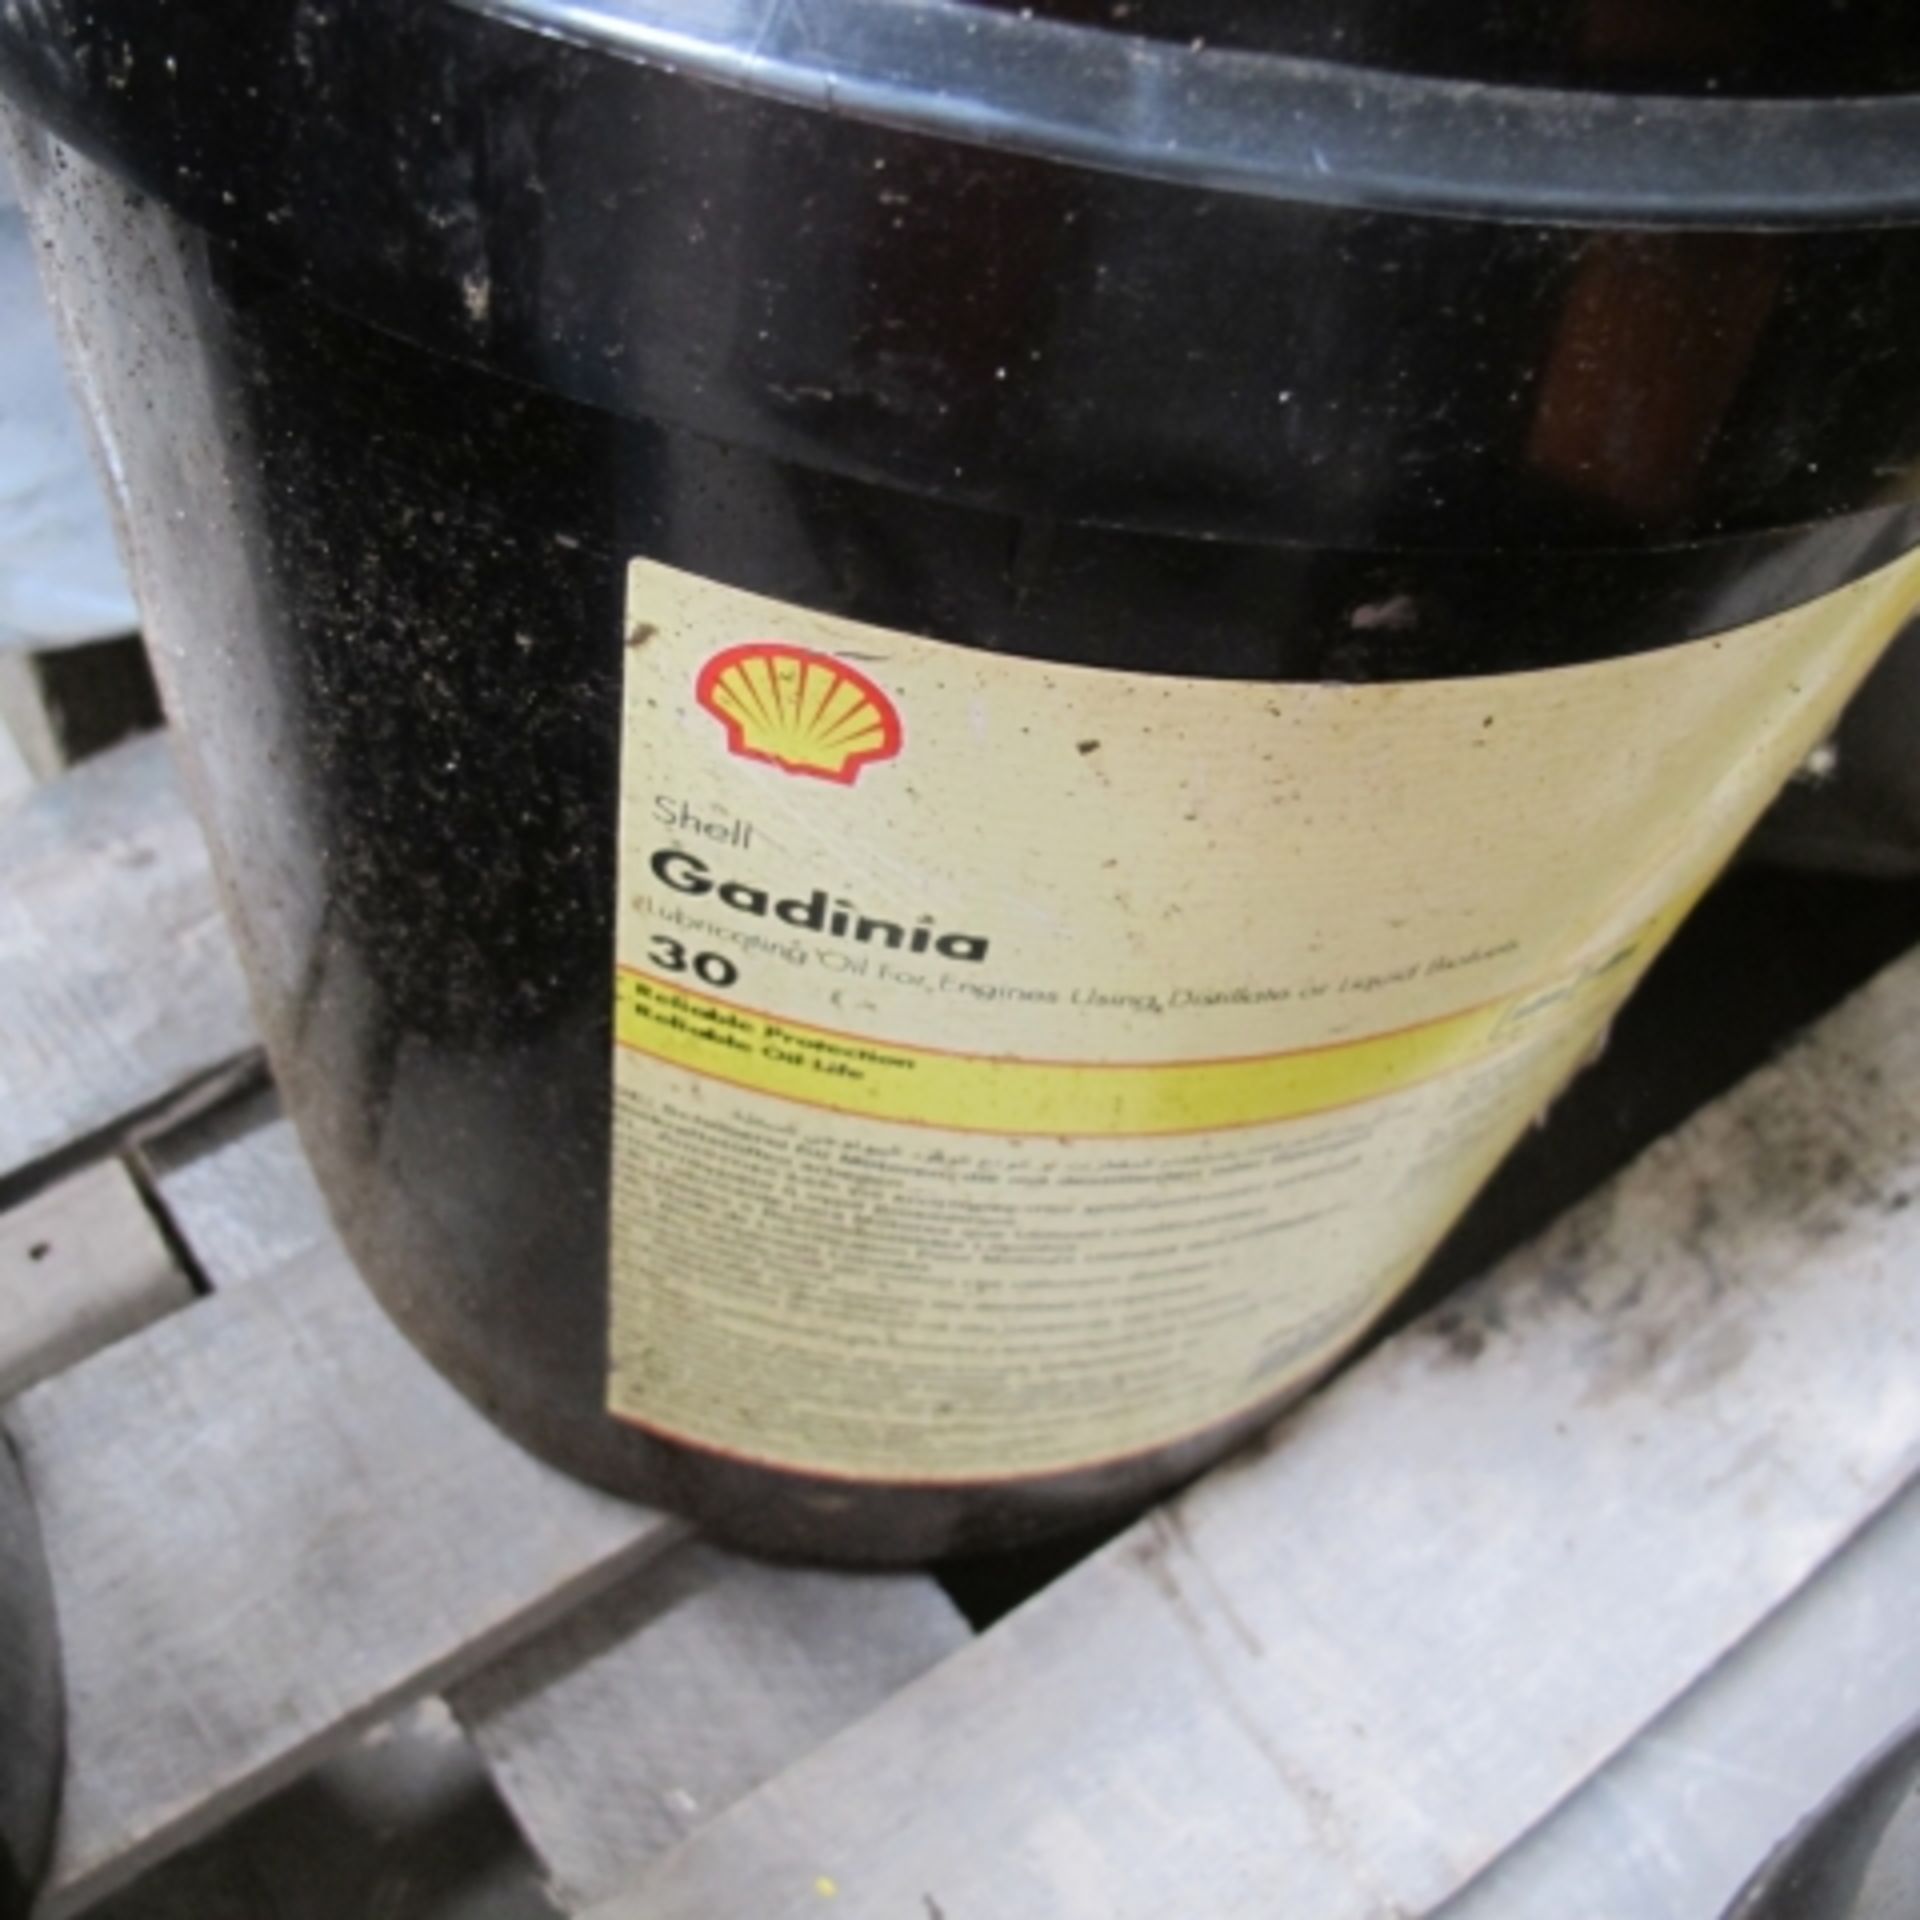 * A 20L Drum of Shell Gadinia Lubricating Oil.